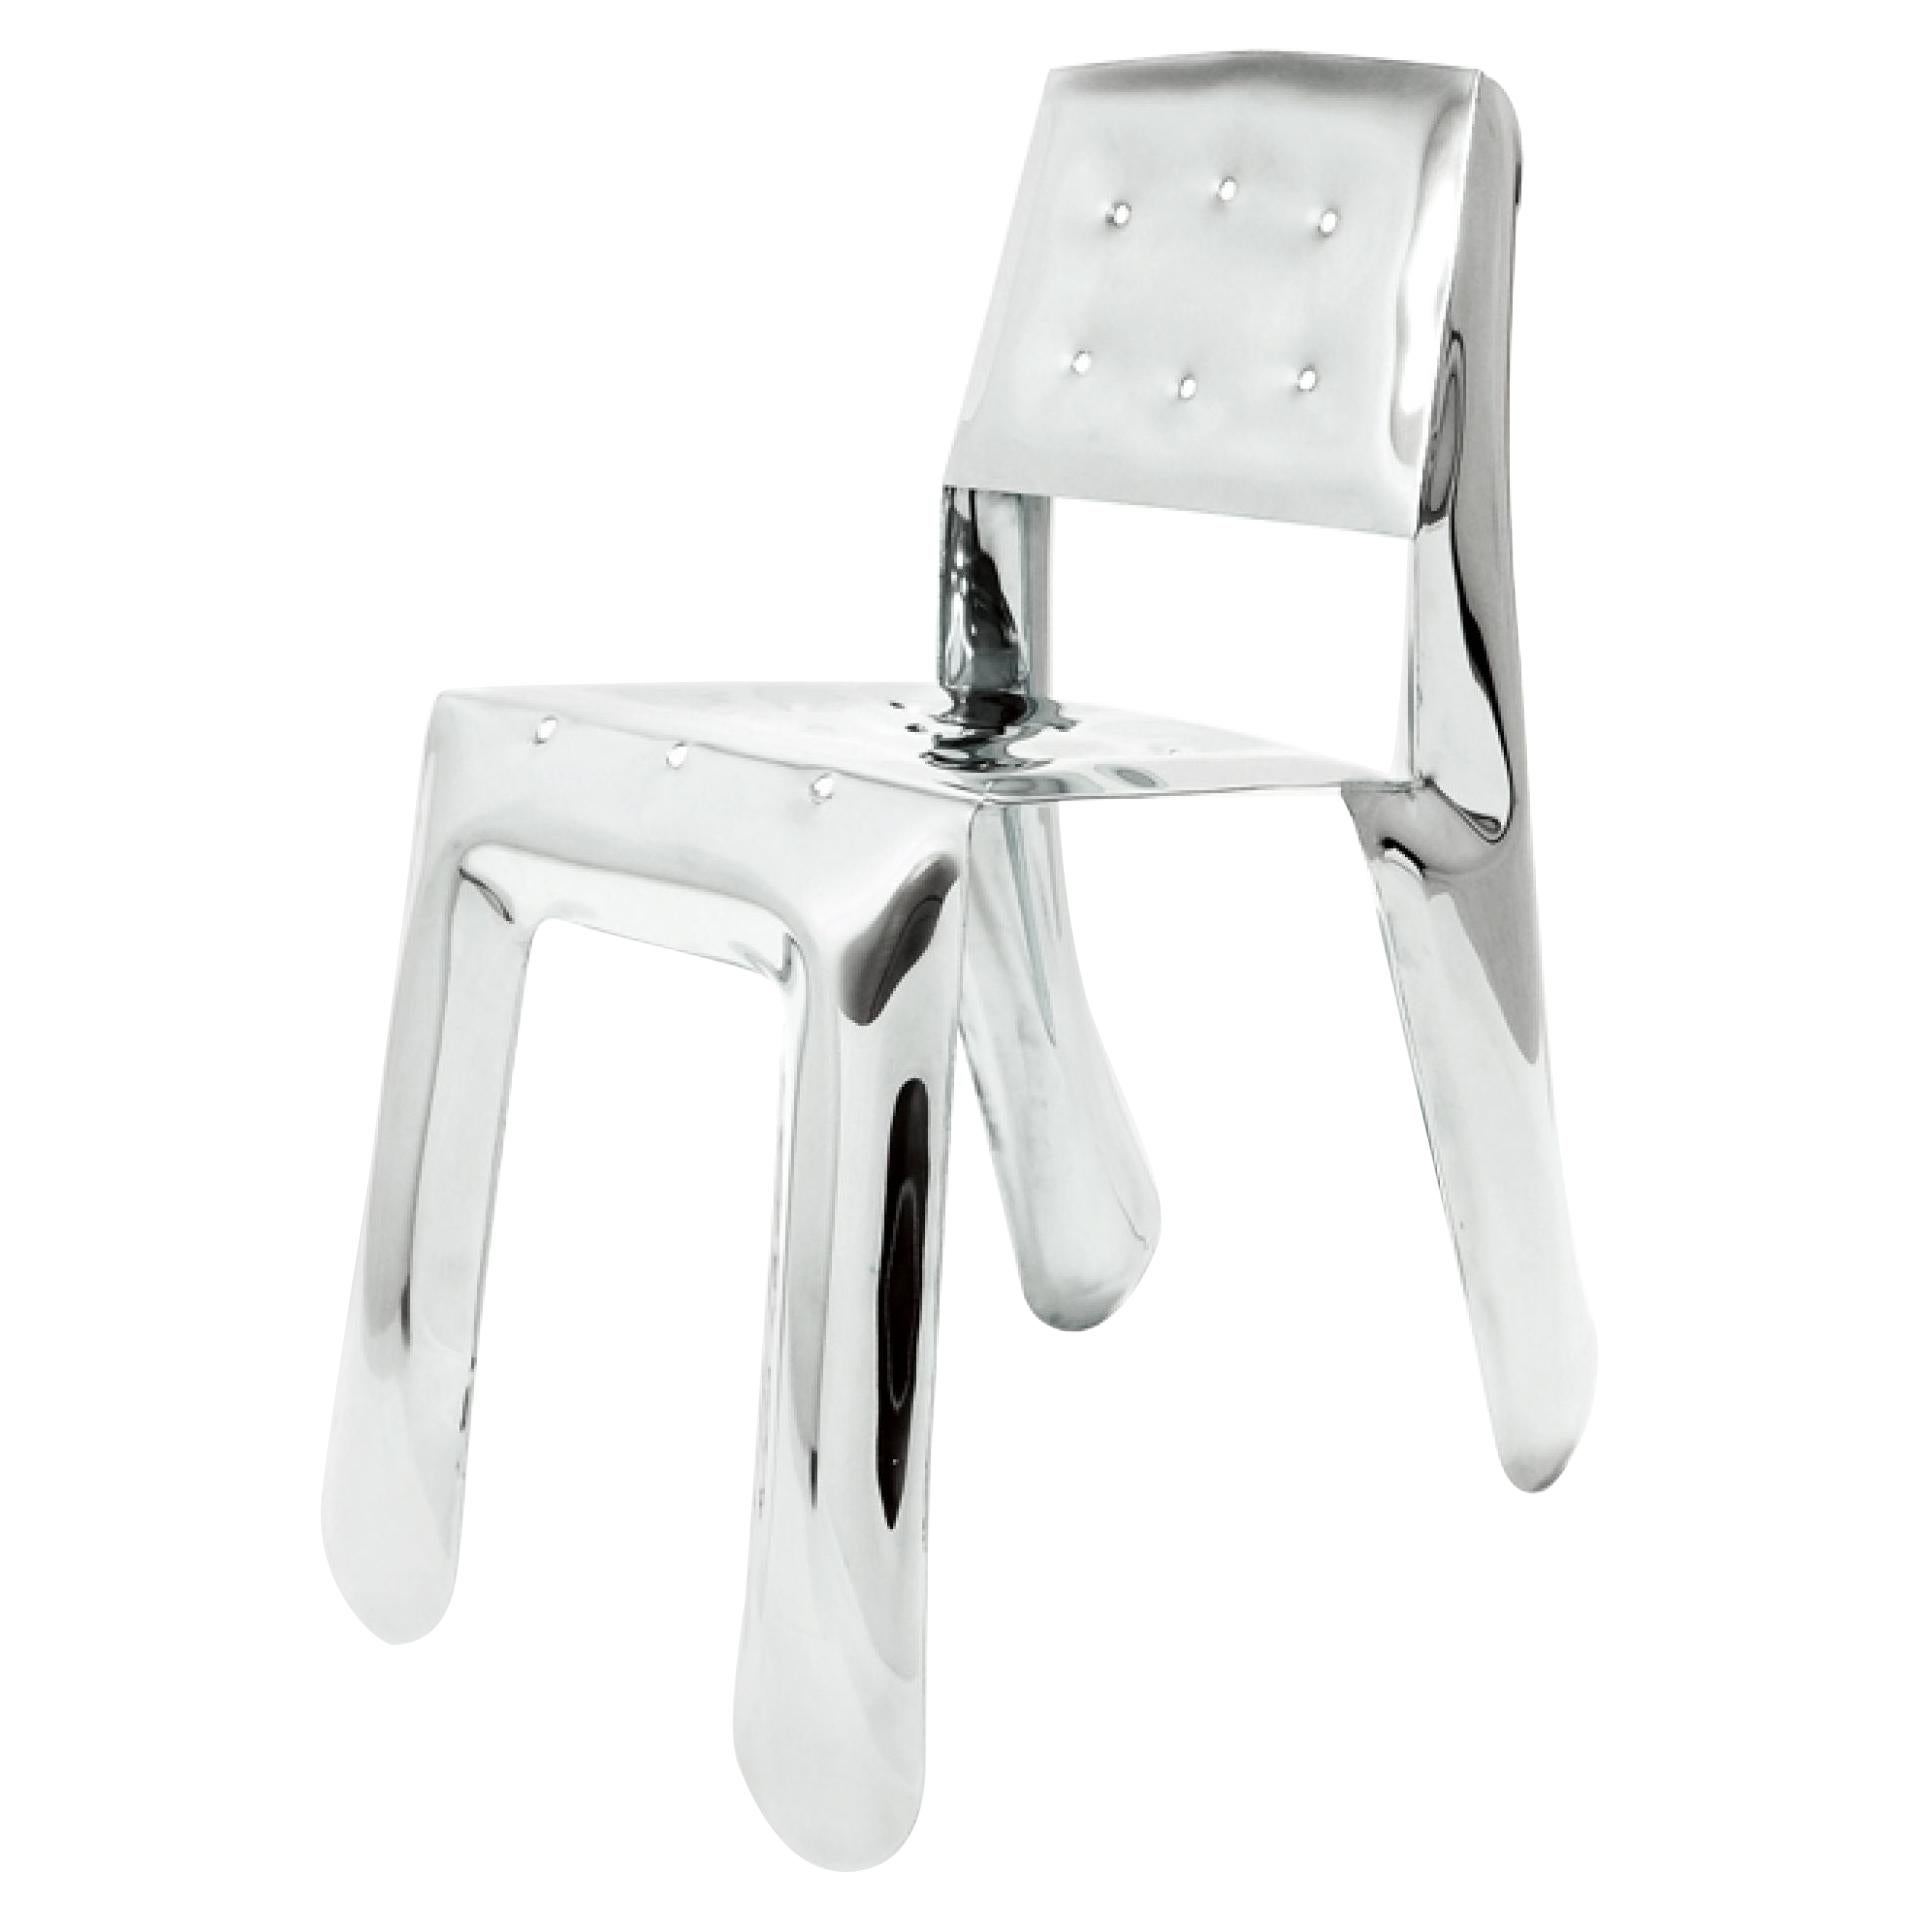 Chippensteeel 0.5 Chair by Zieta, Polished Stainless Steel